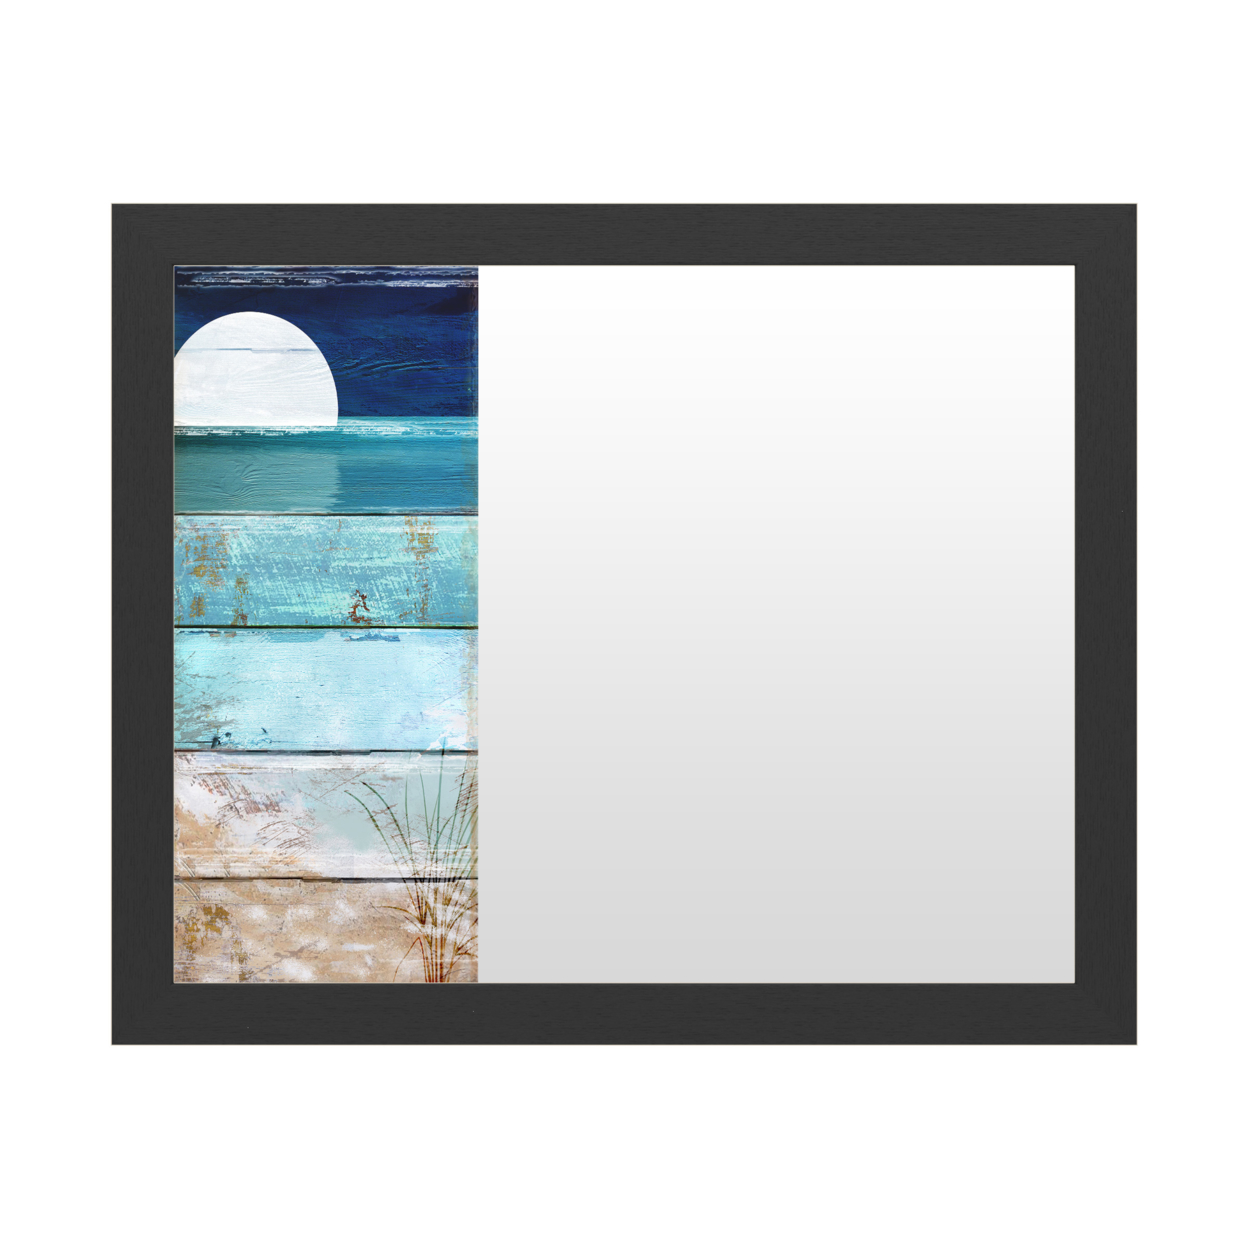 Dry Erase 16 X 20 Marker Board With Printed Artwork - Color Bakery Beach Moonrise I White Board - Ready To Hang